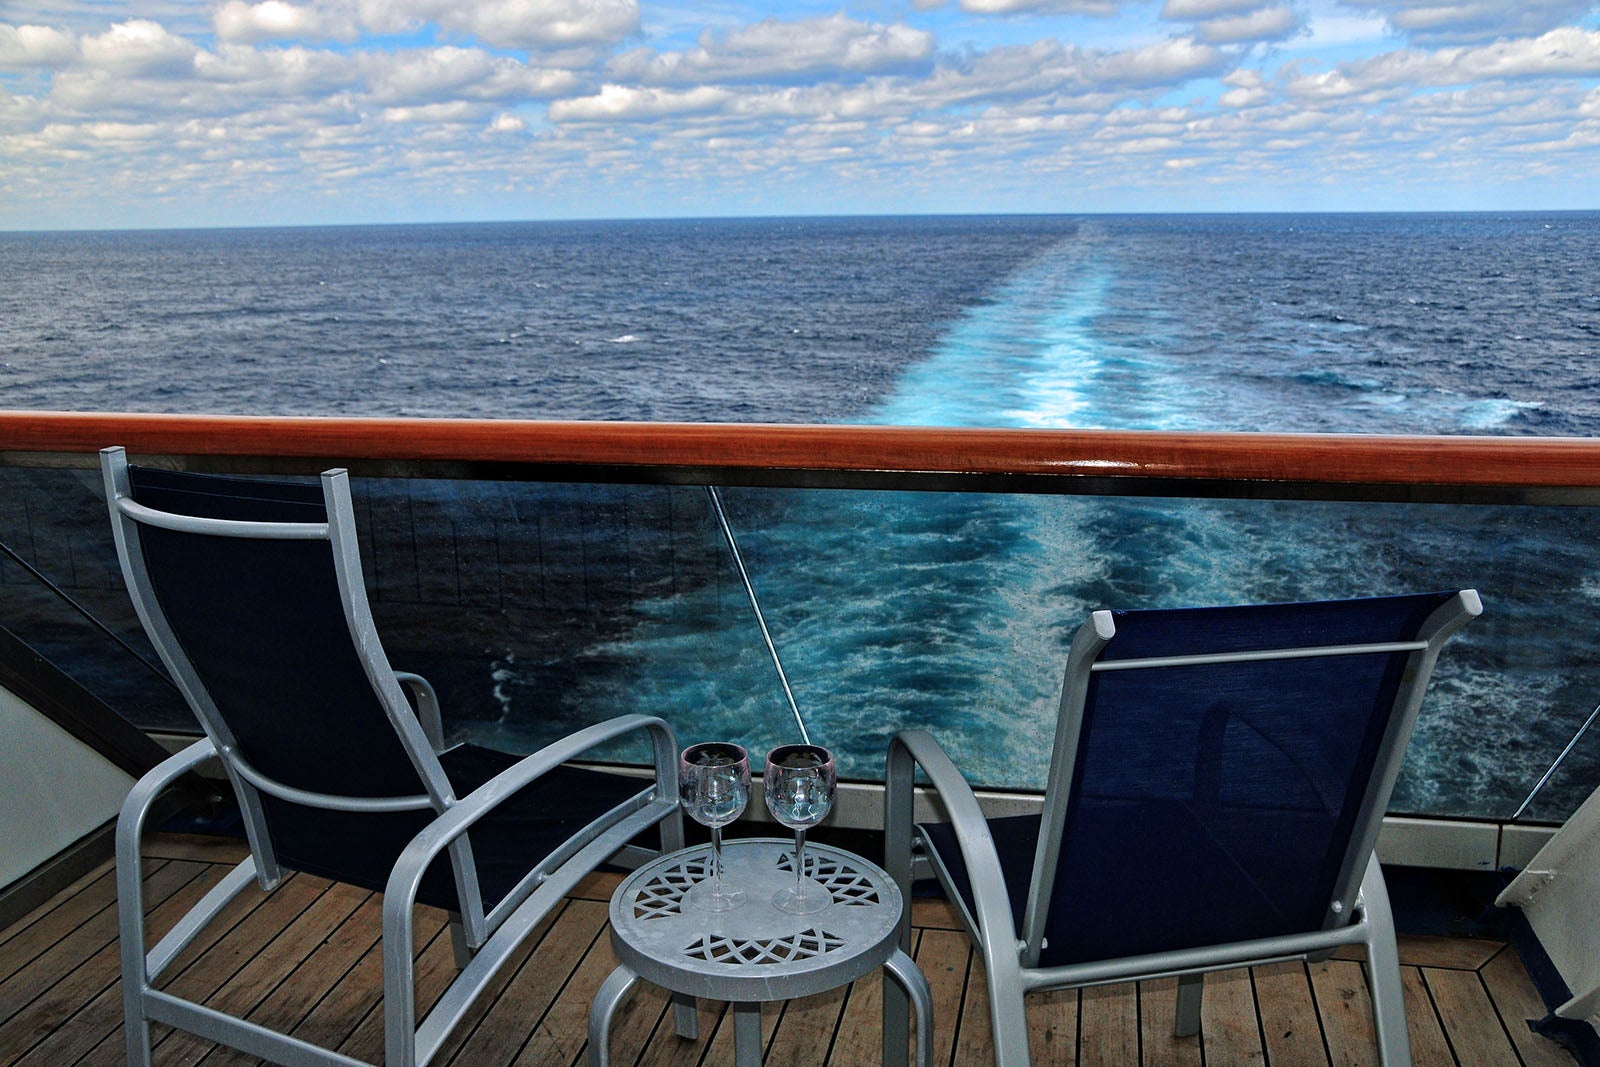 Two empty chairs on the back balcony of a cruise ship overlook the trailing wake of the ship